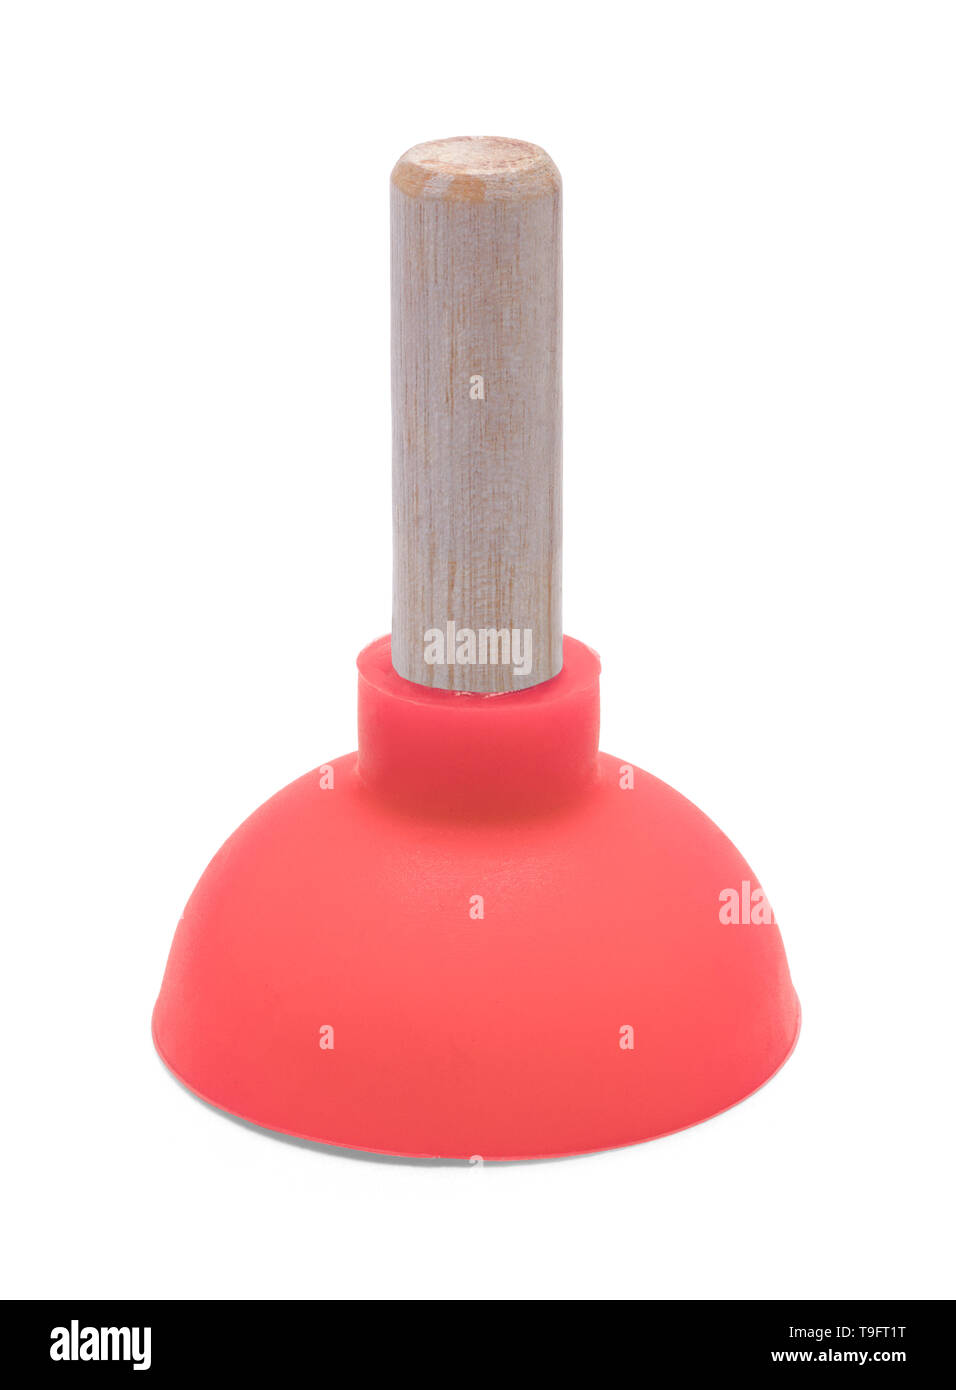 Small Red Rubber Plunger Isolated on White Background. Stock Photo